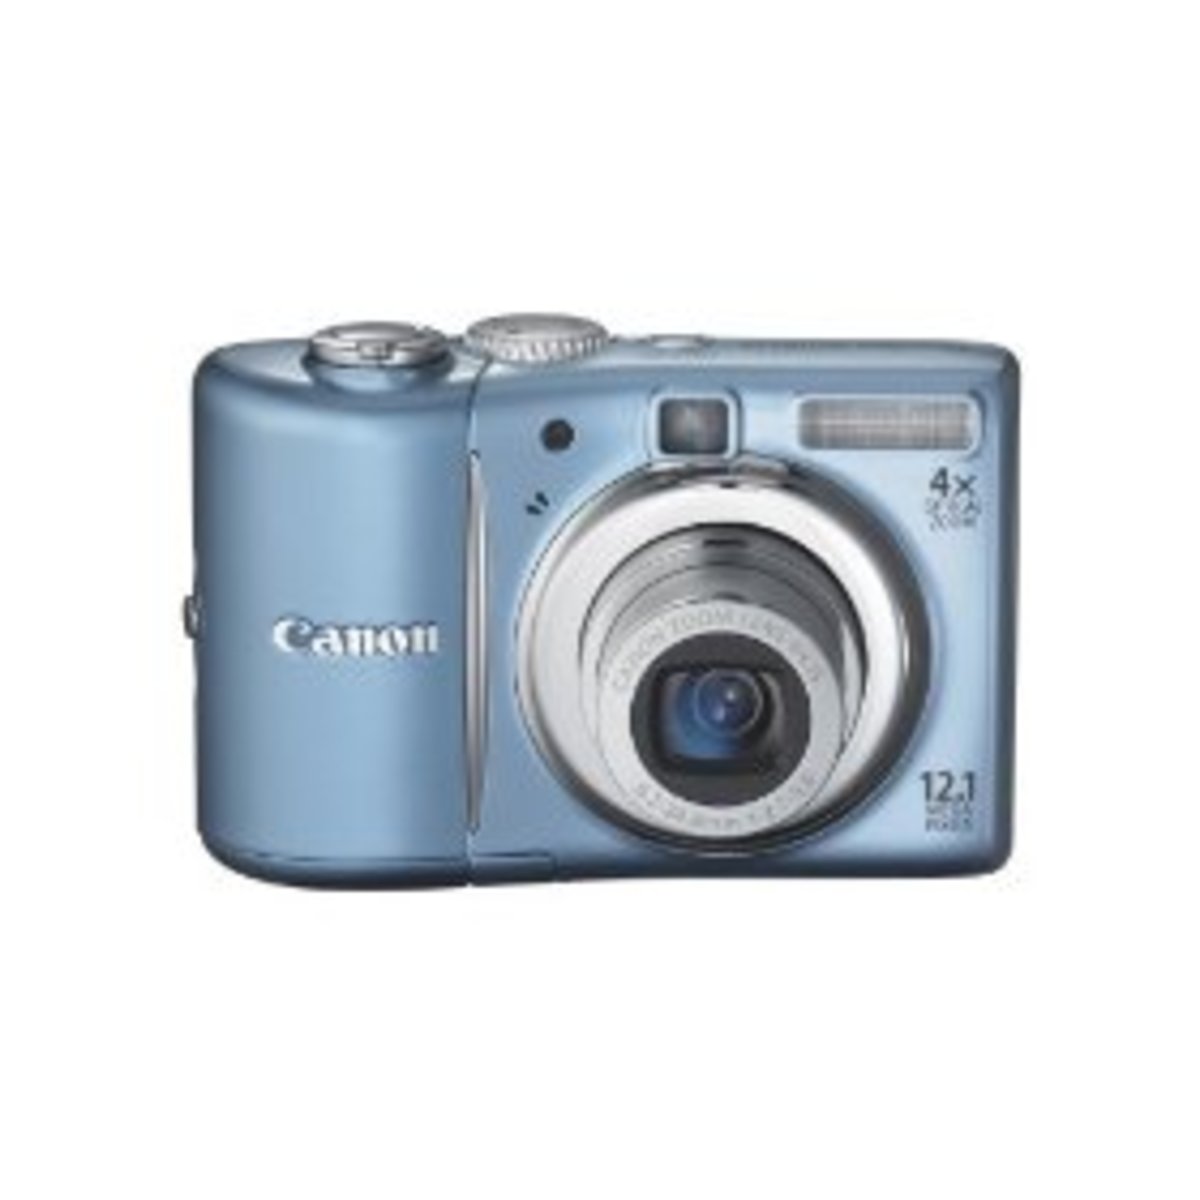 What is the best affordable excellent digital camera